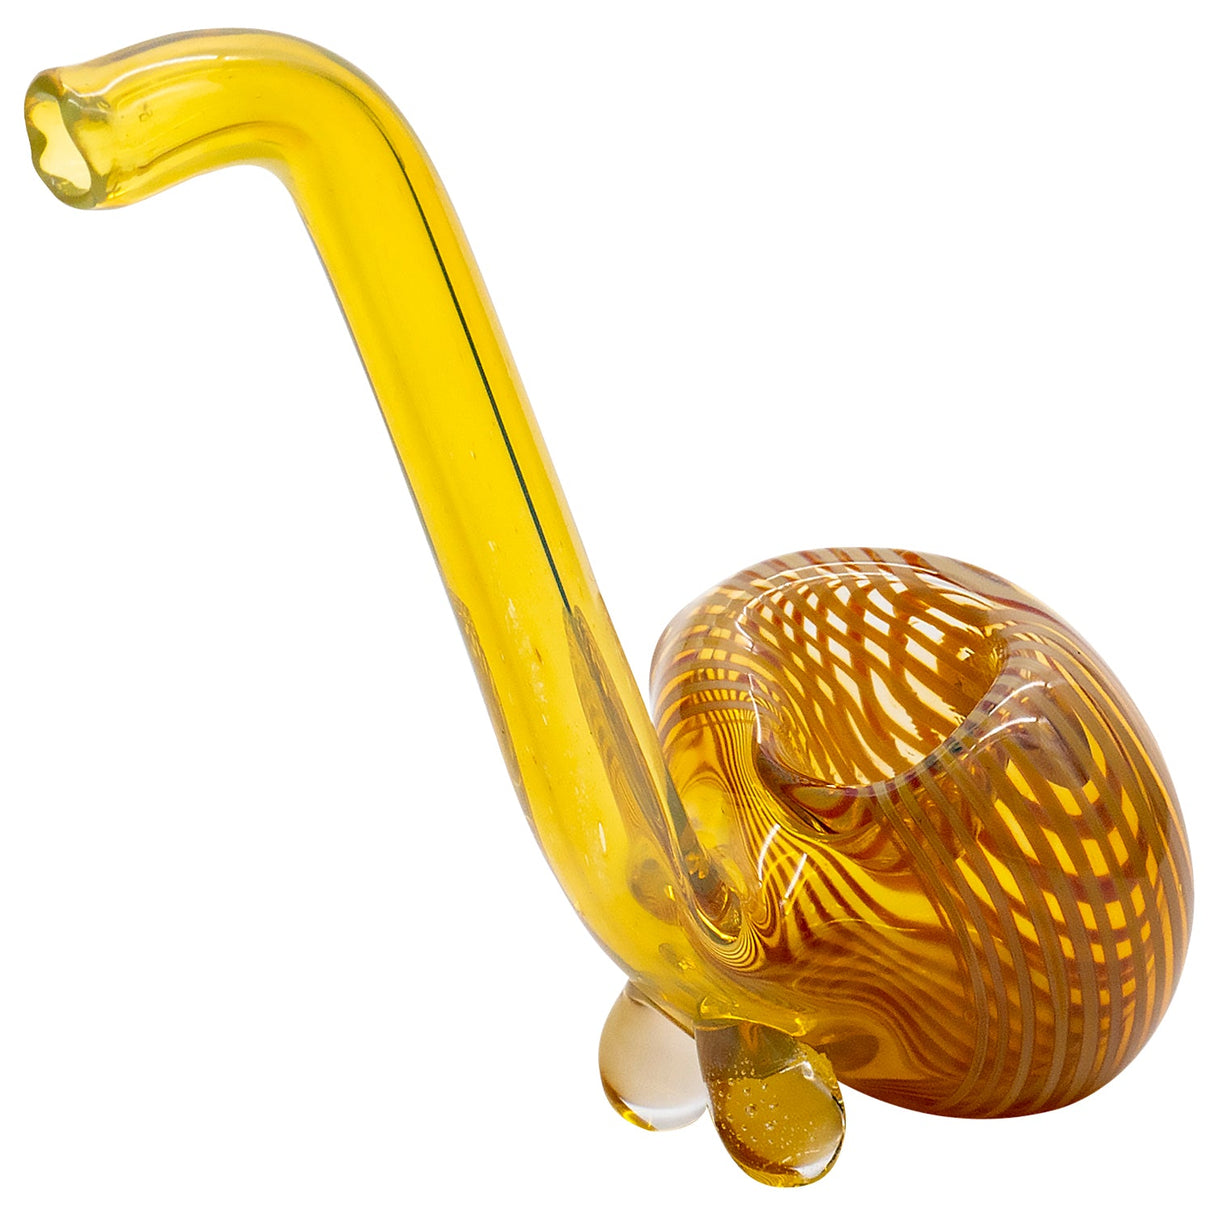 LA Pipes "Flaco" Skinny Glass Sherlock Pipe in Yellow - Side View on White Background